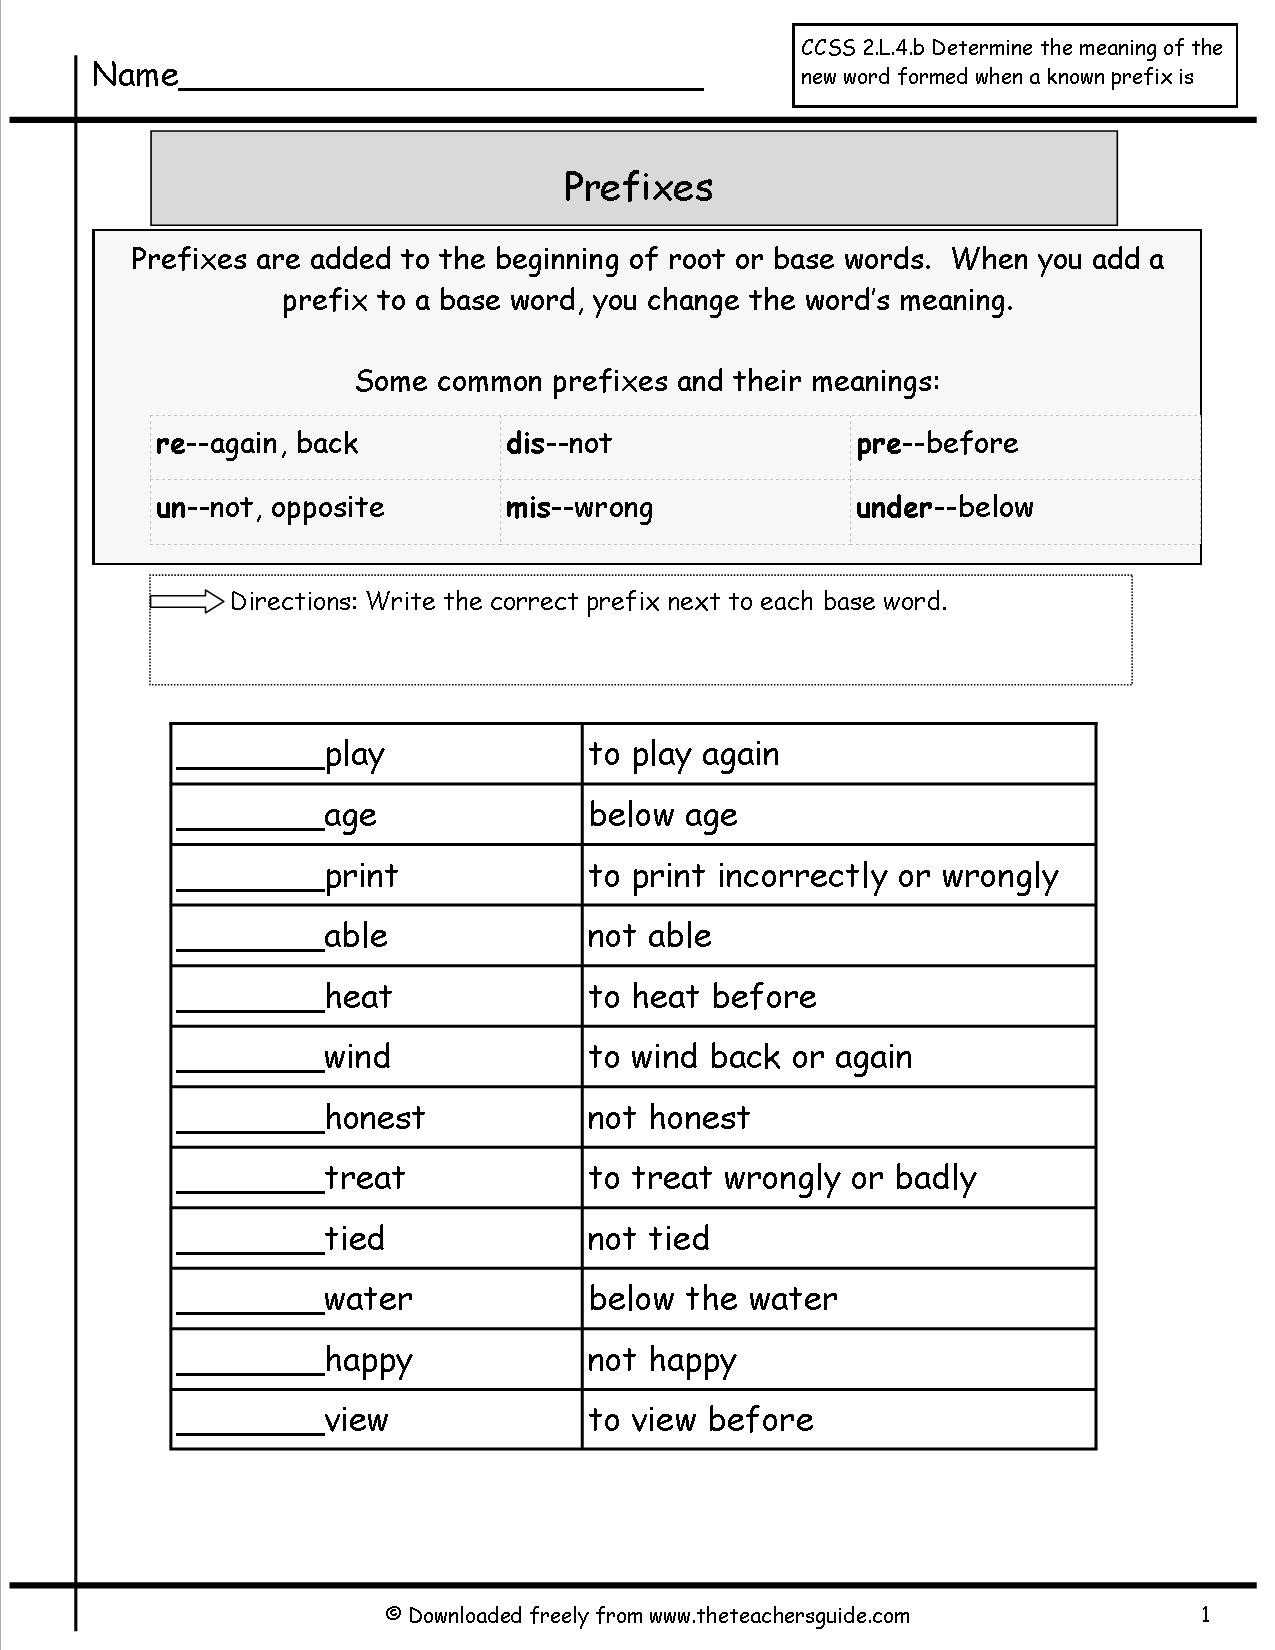 Prefix Worksheet 4th Grade Free Prefixes and Suffixes Worksheets From the Teacher S Guide